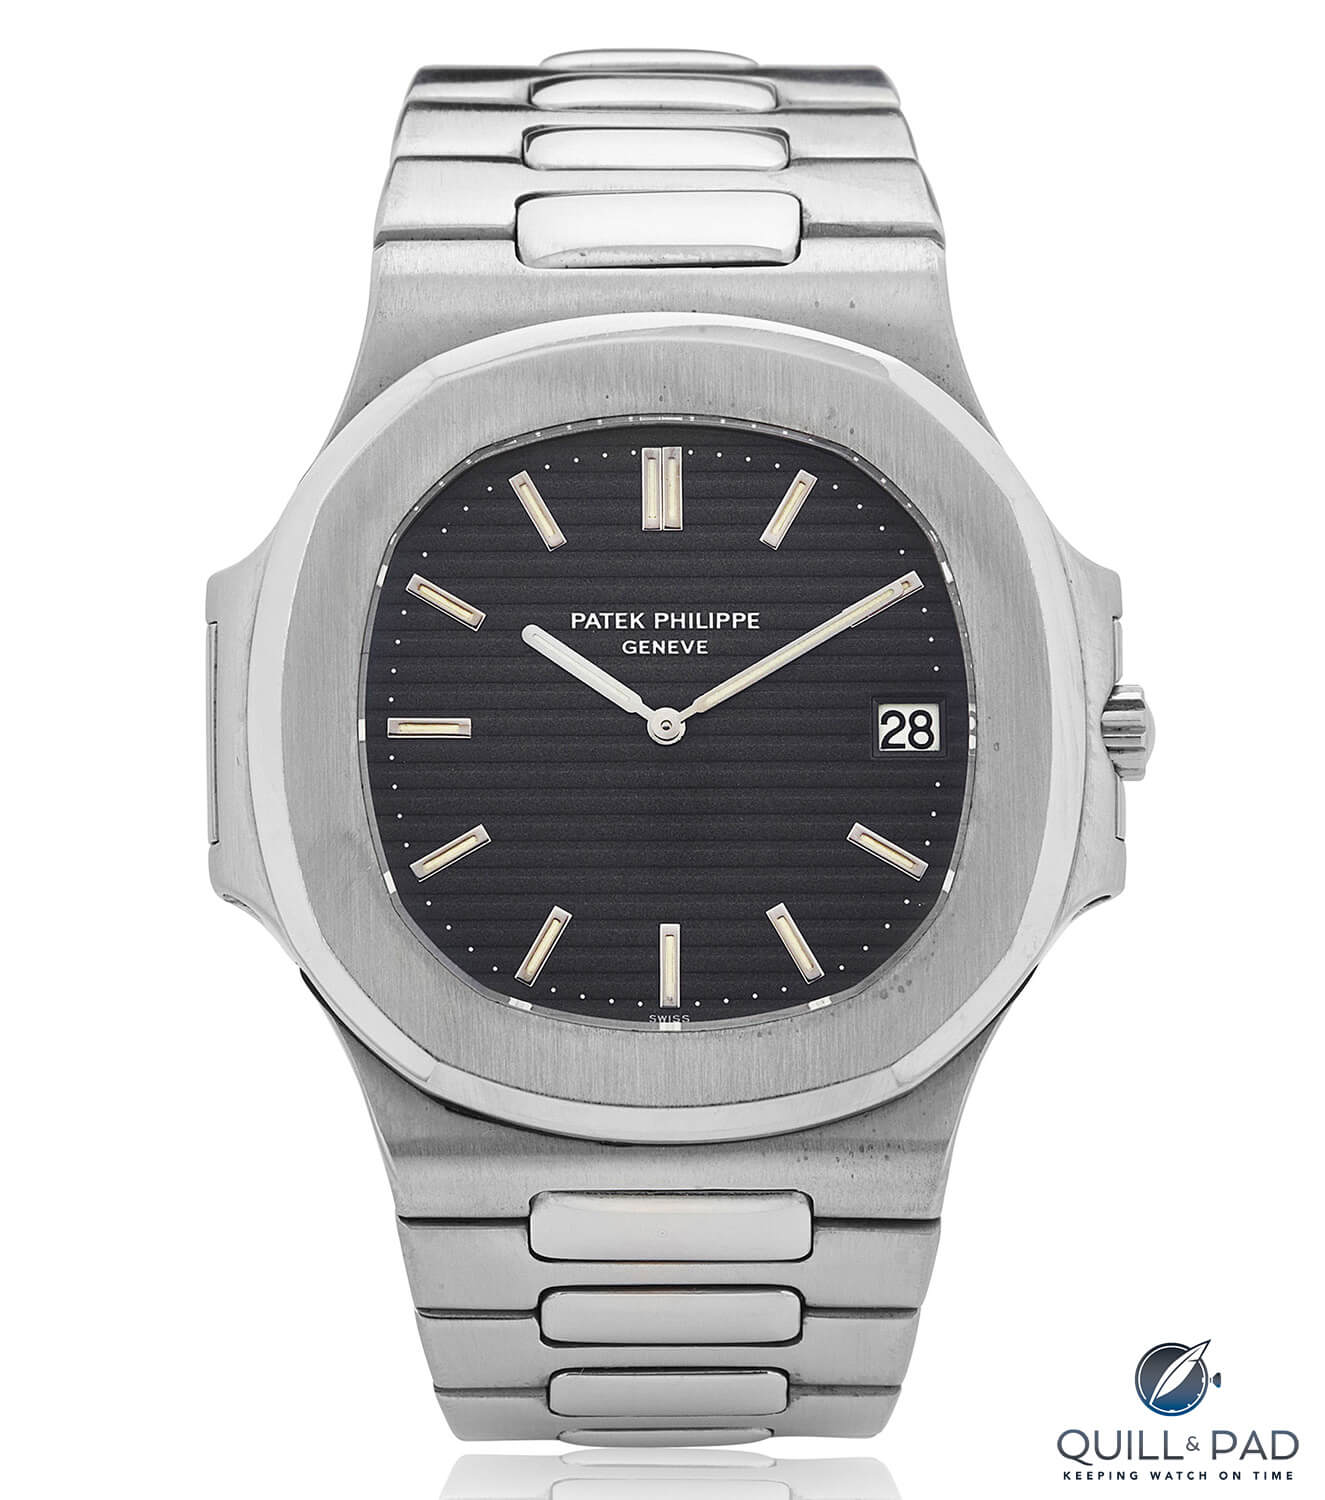 Patek Philippe Nautilus Reference 3700/1 from 1976